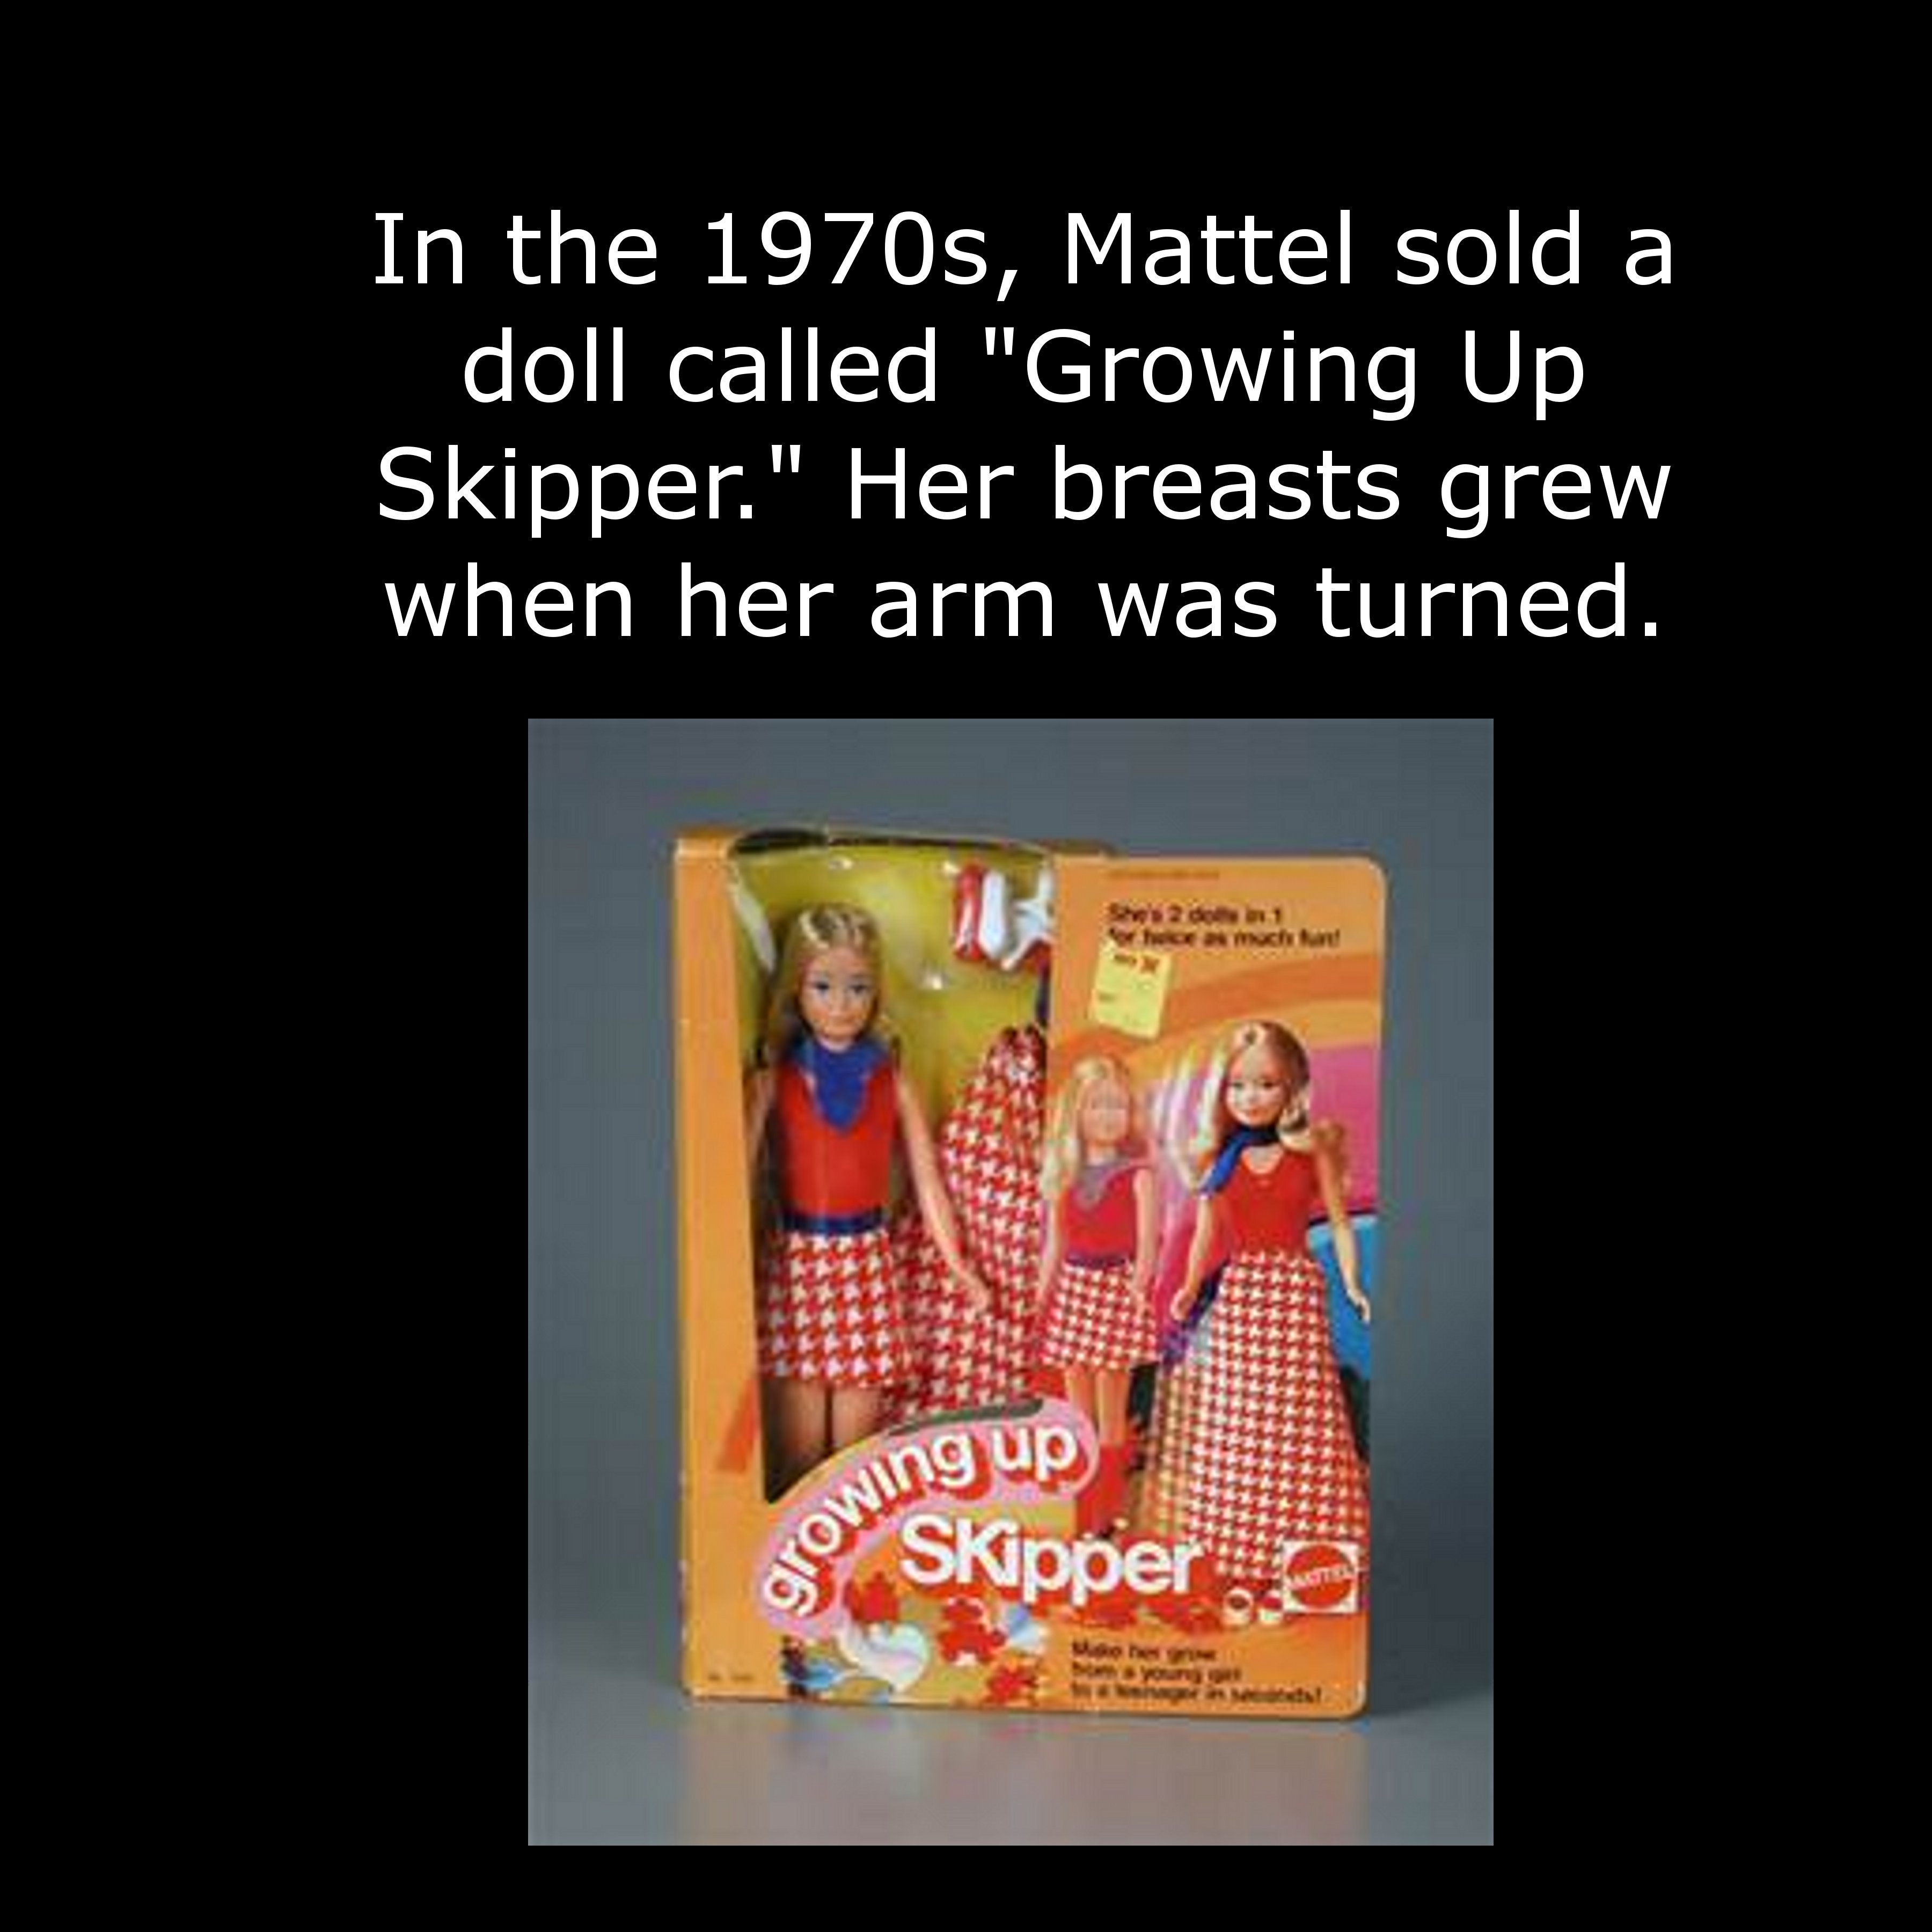 growing up skipper doll - grow Skipper In the 1970s, Mattel sold a doll called "Growing Up Skipper." Her breasts grew when her arm was turned. up